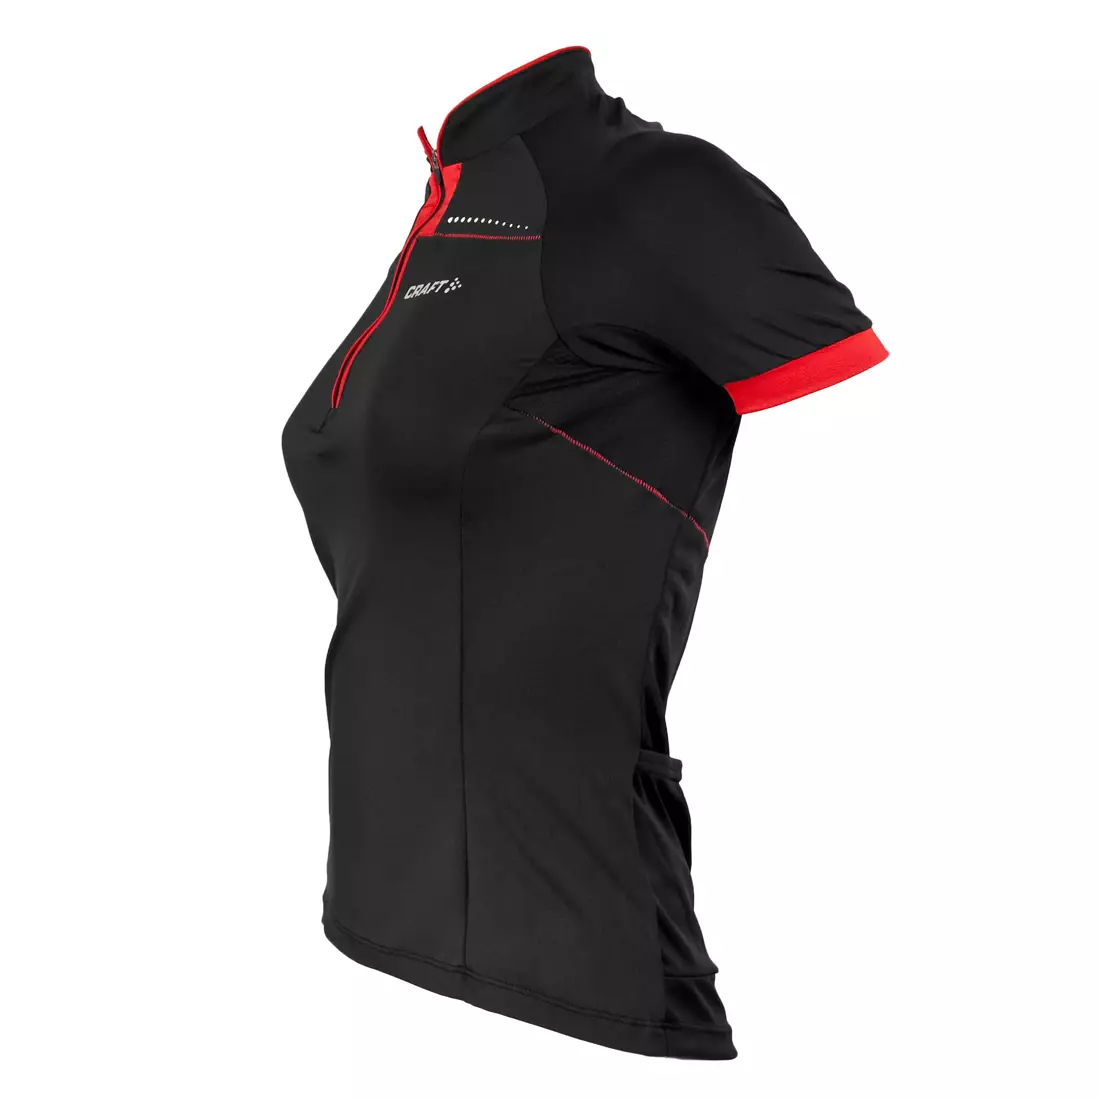 CRAFT ACTIVE women's cycling jersey 1902569-9430